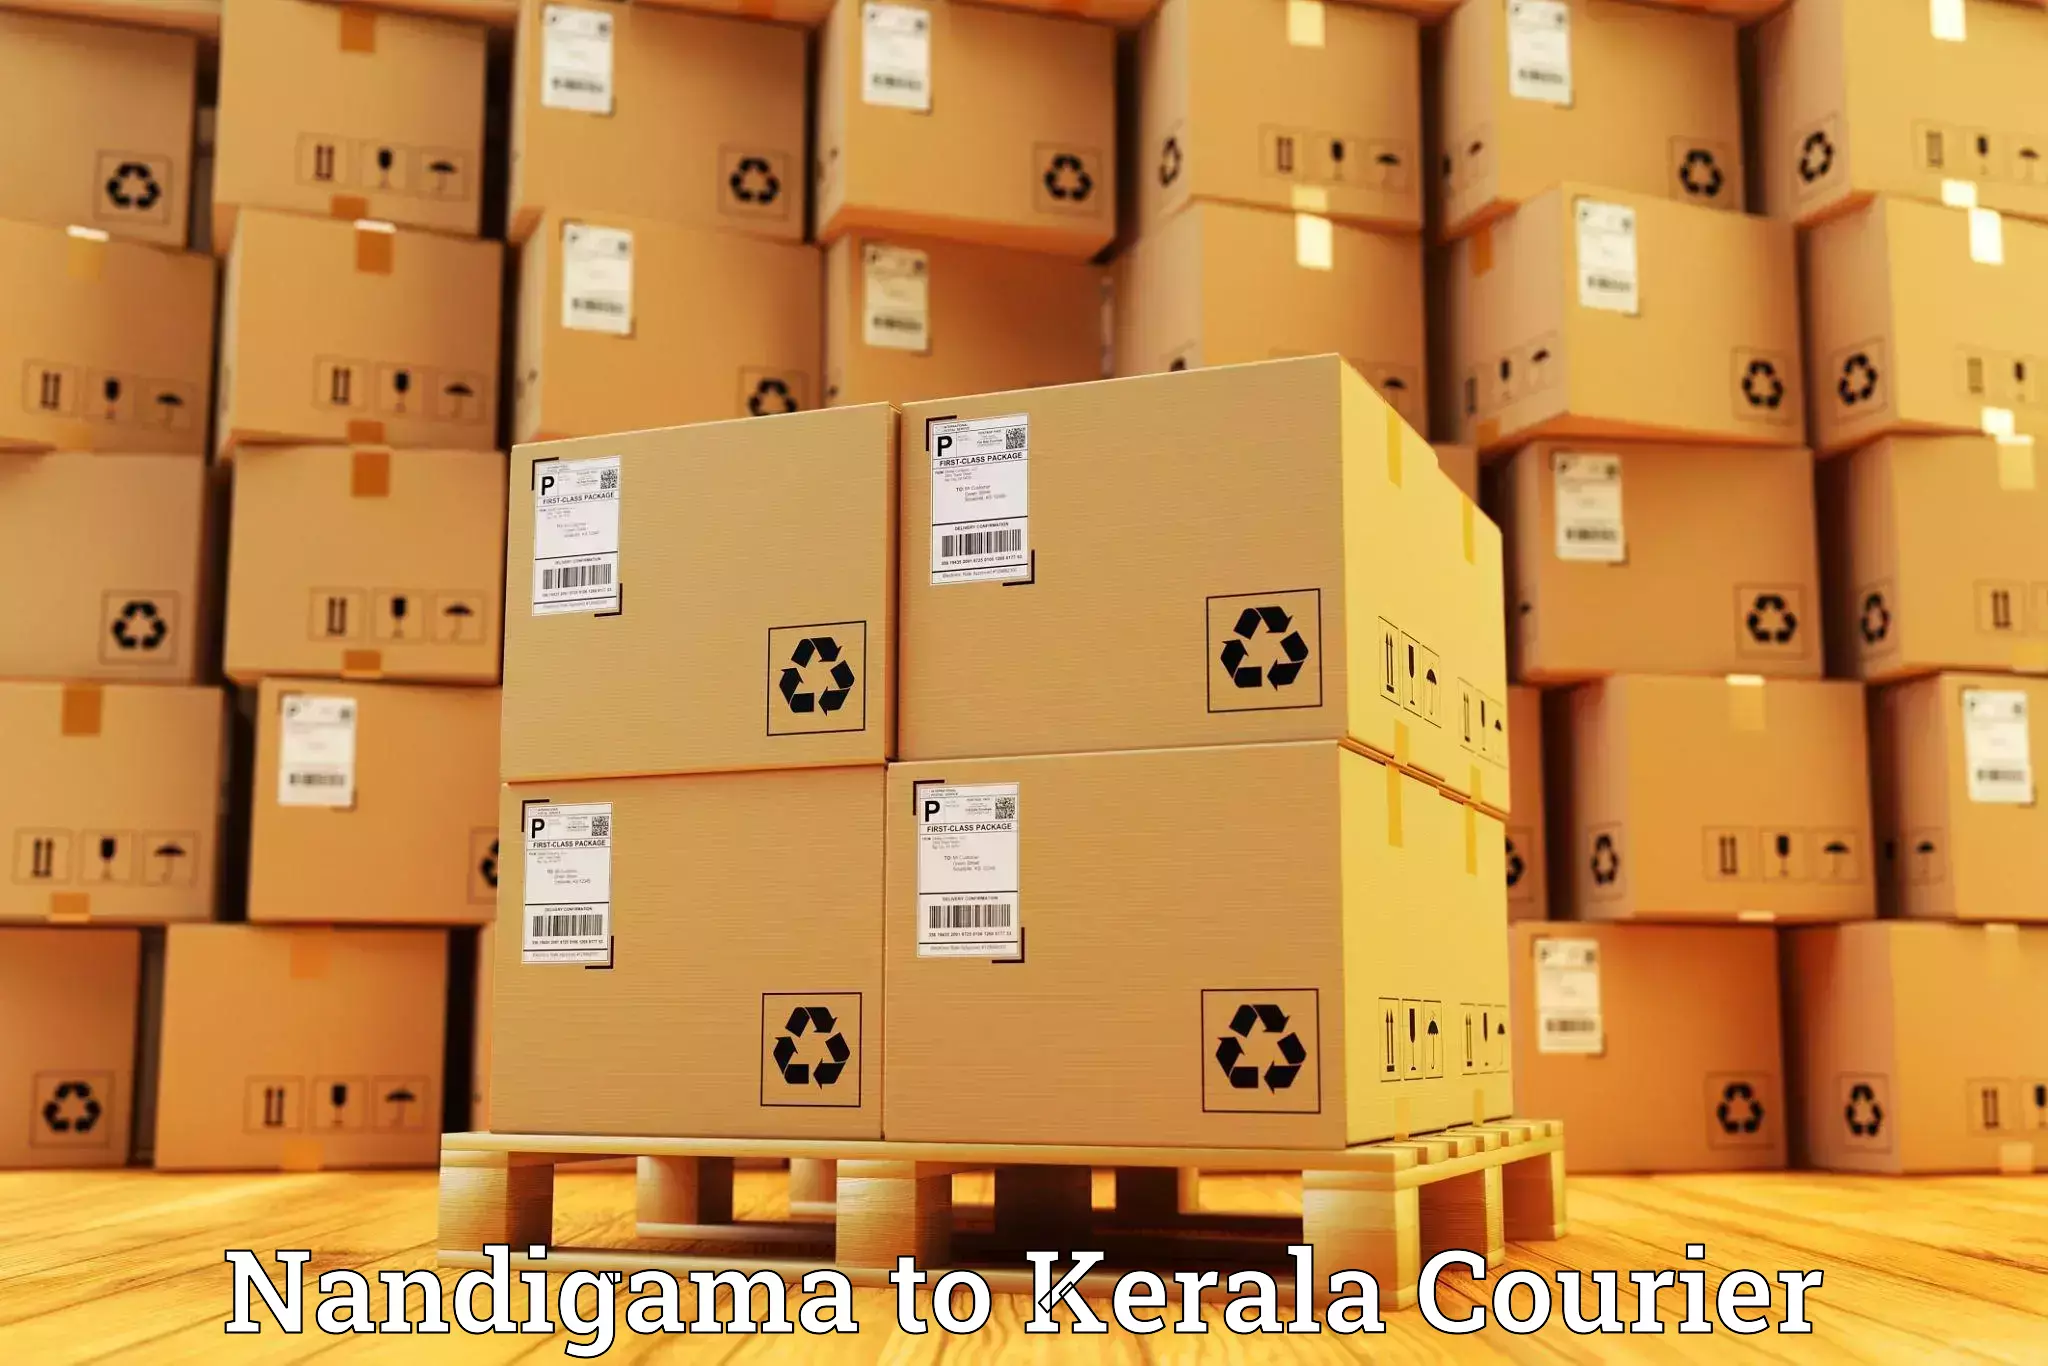 Nationwide parcel services Nandigama to Kochi